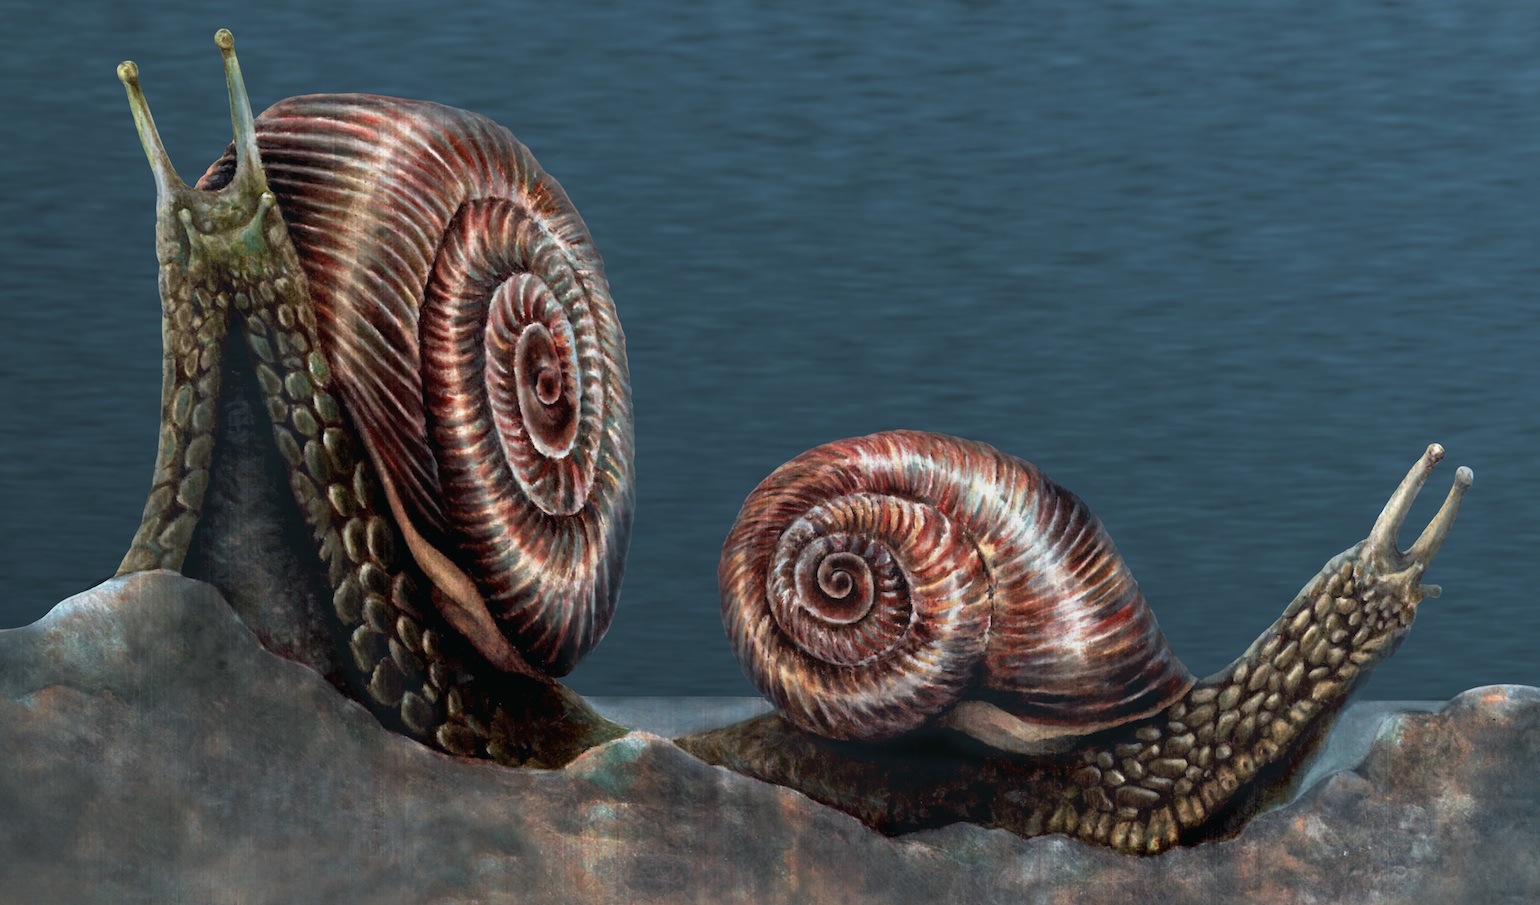 An Illustration by Tyler Ray Fewell of a Silurian Poleumita discorus gastropod  based on specimens of Poleumita discorus and other closely related species from the Chicago area and Much Wenlock England.